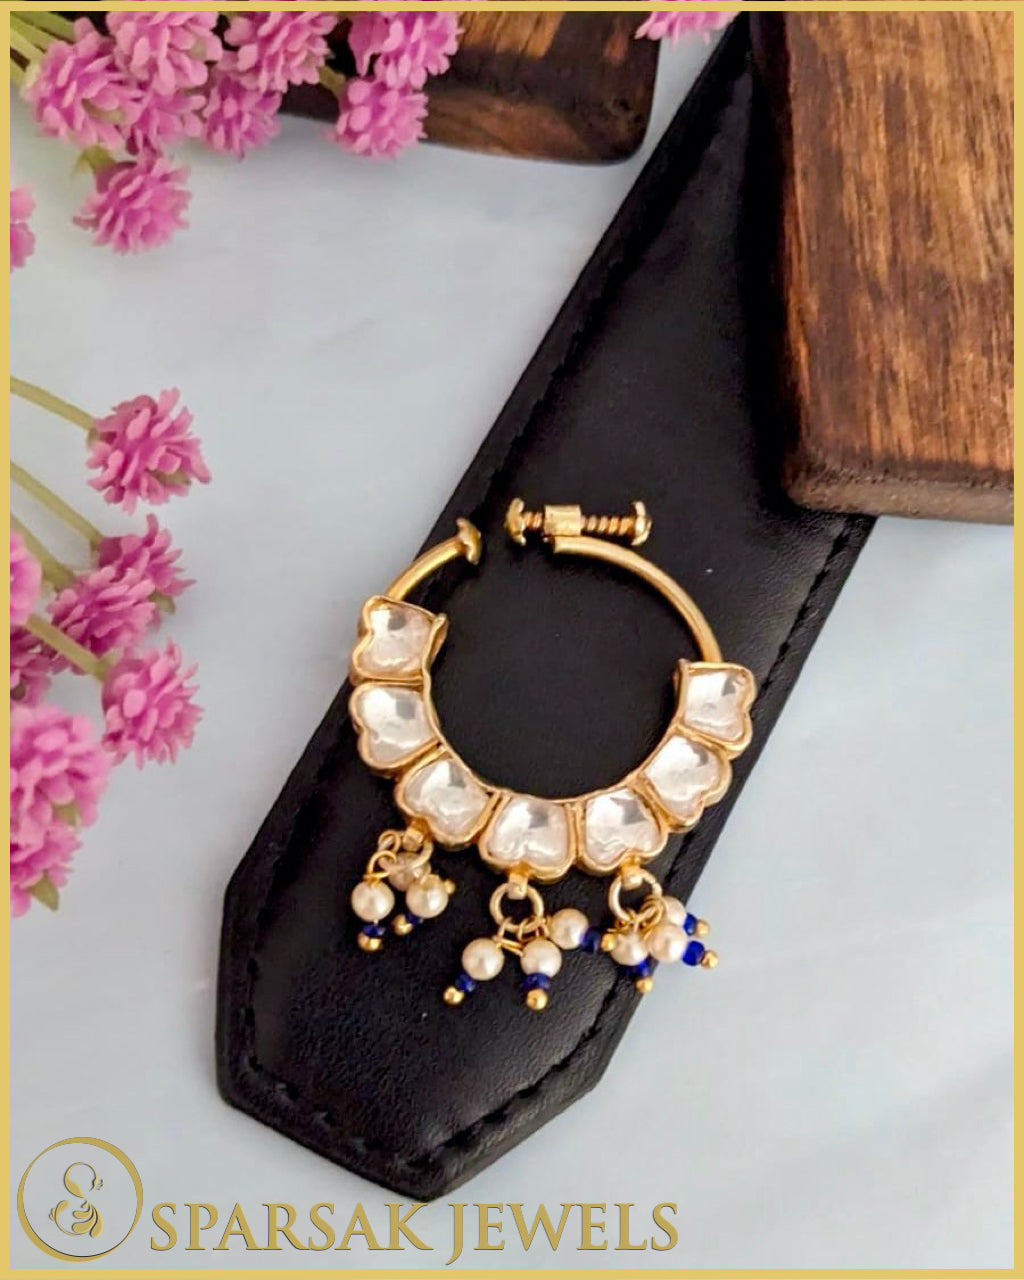 Gold Polished Kundan Nath made in silver by Sparsak Jewels